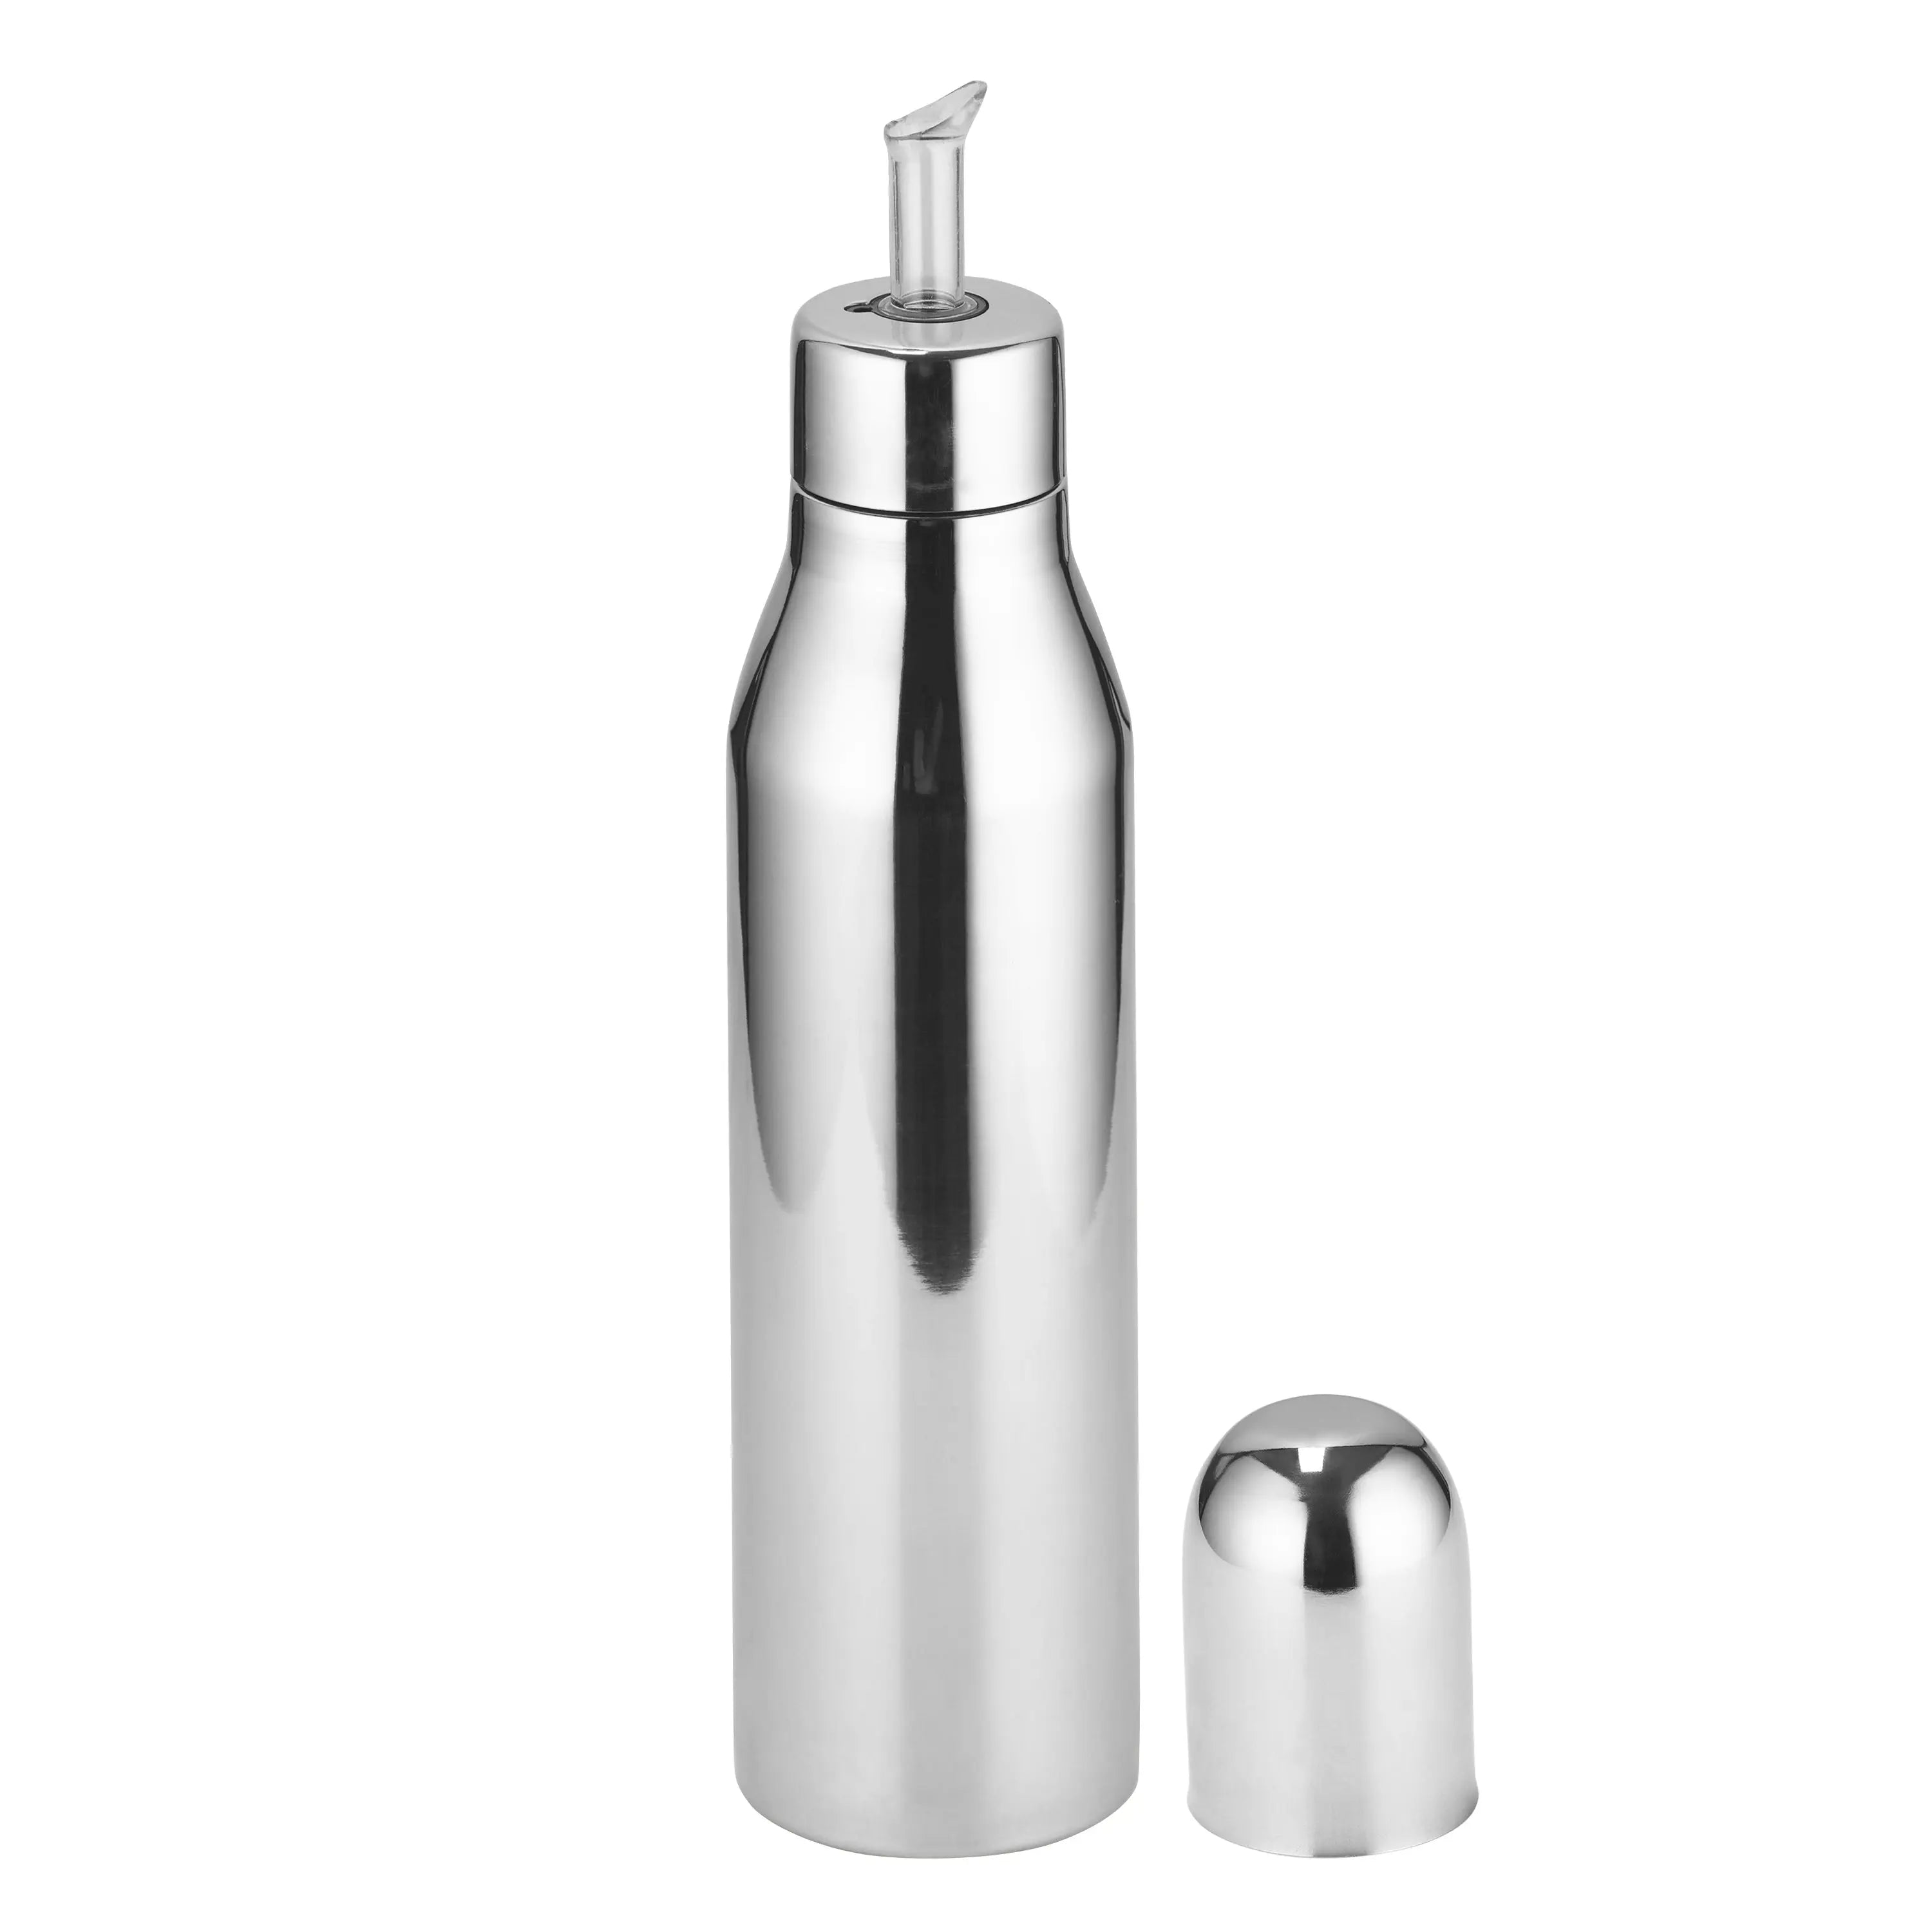 STAINLESS STEEL OIL CAN TALL - CROCKERY WALA AND COMPANY 